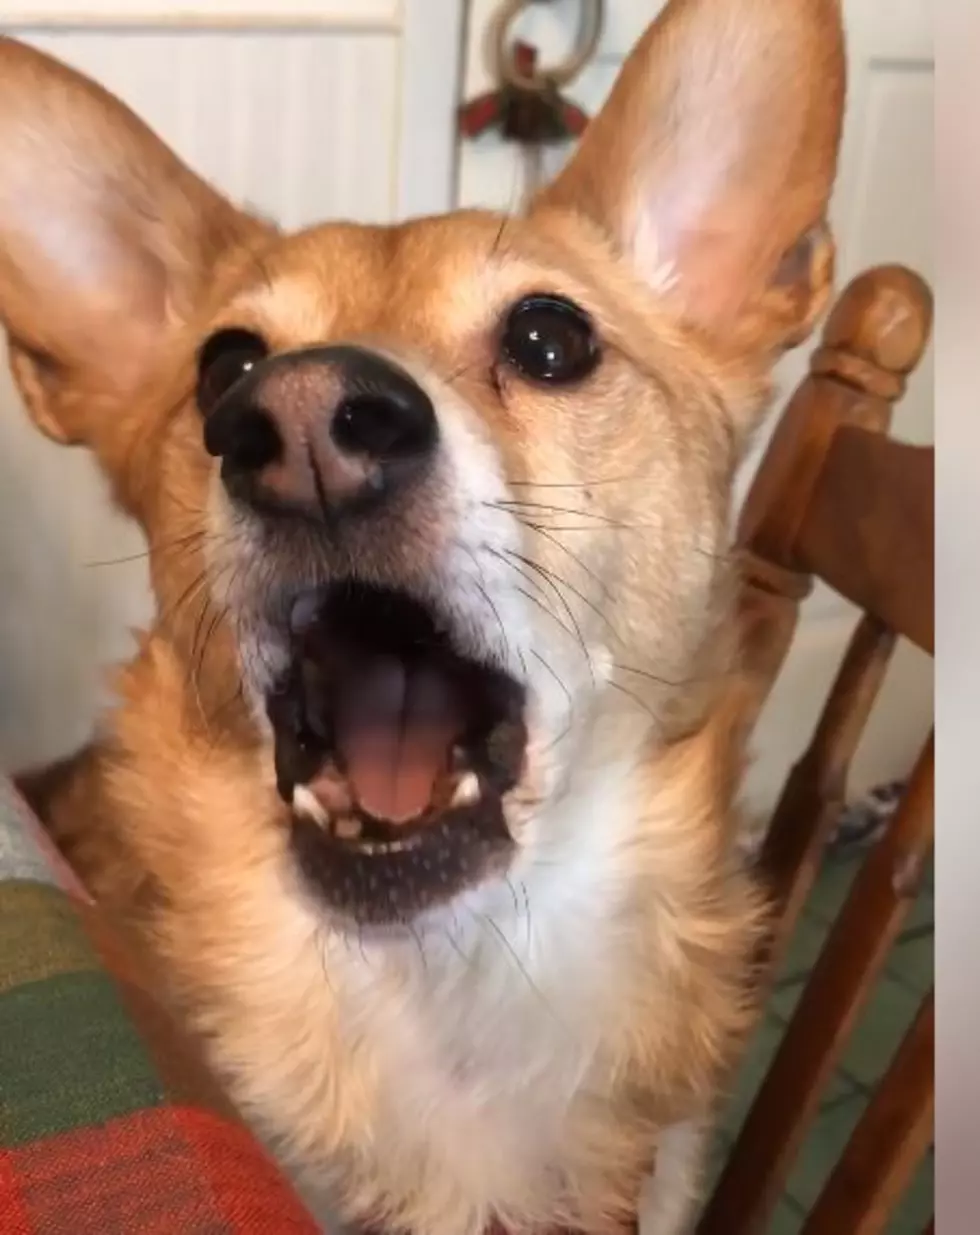 Amazing Local Dog Says ‘I Love You’ and Sings (VIDEO)